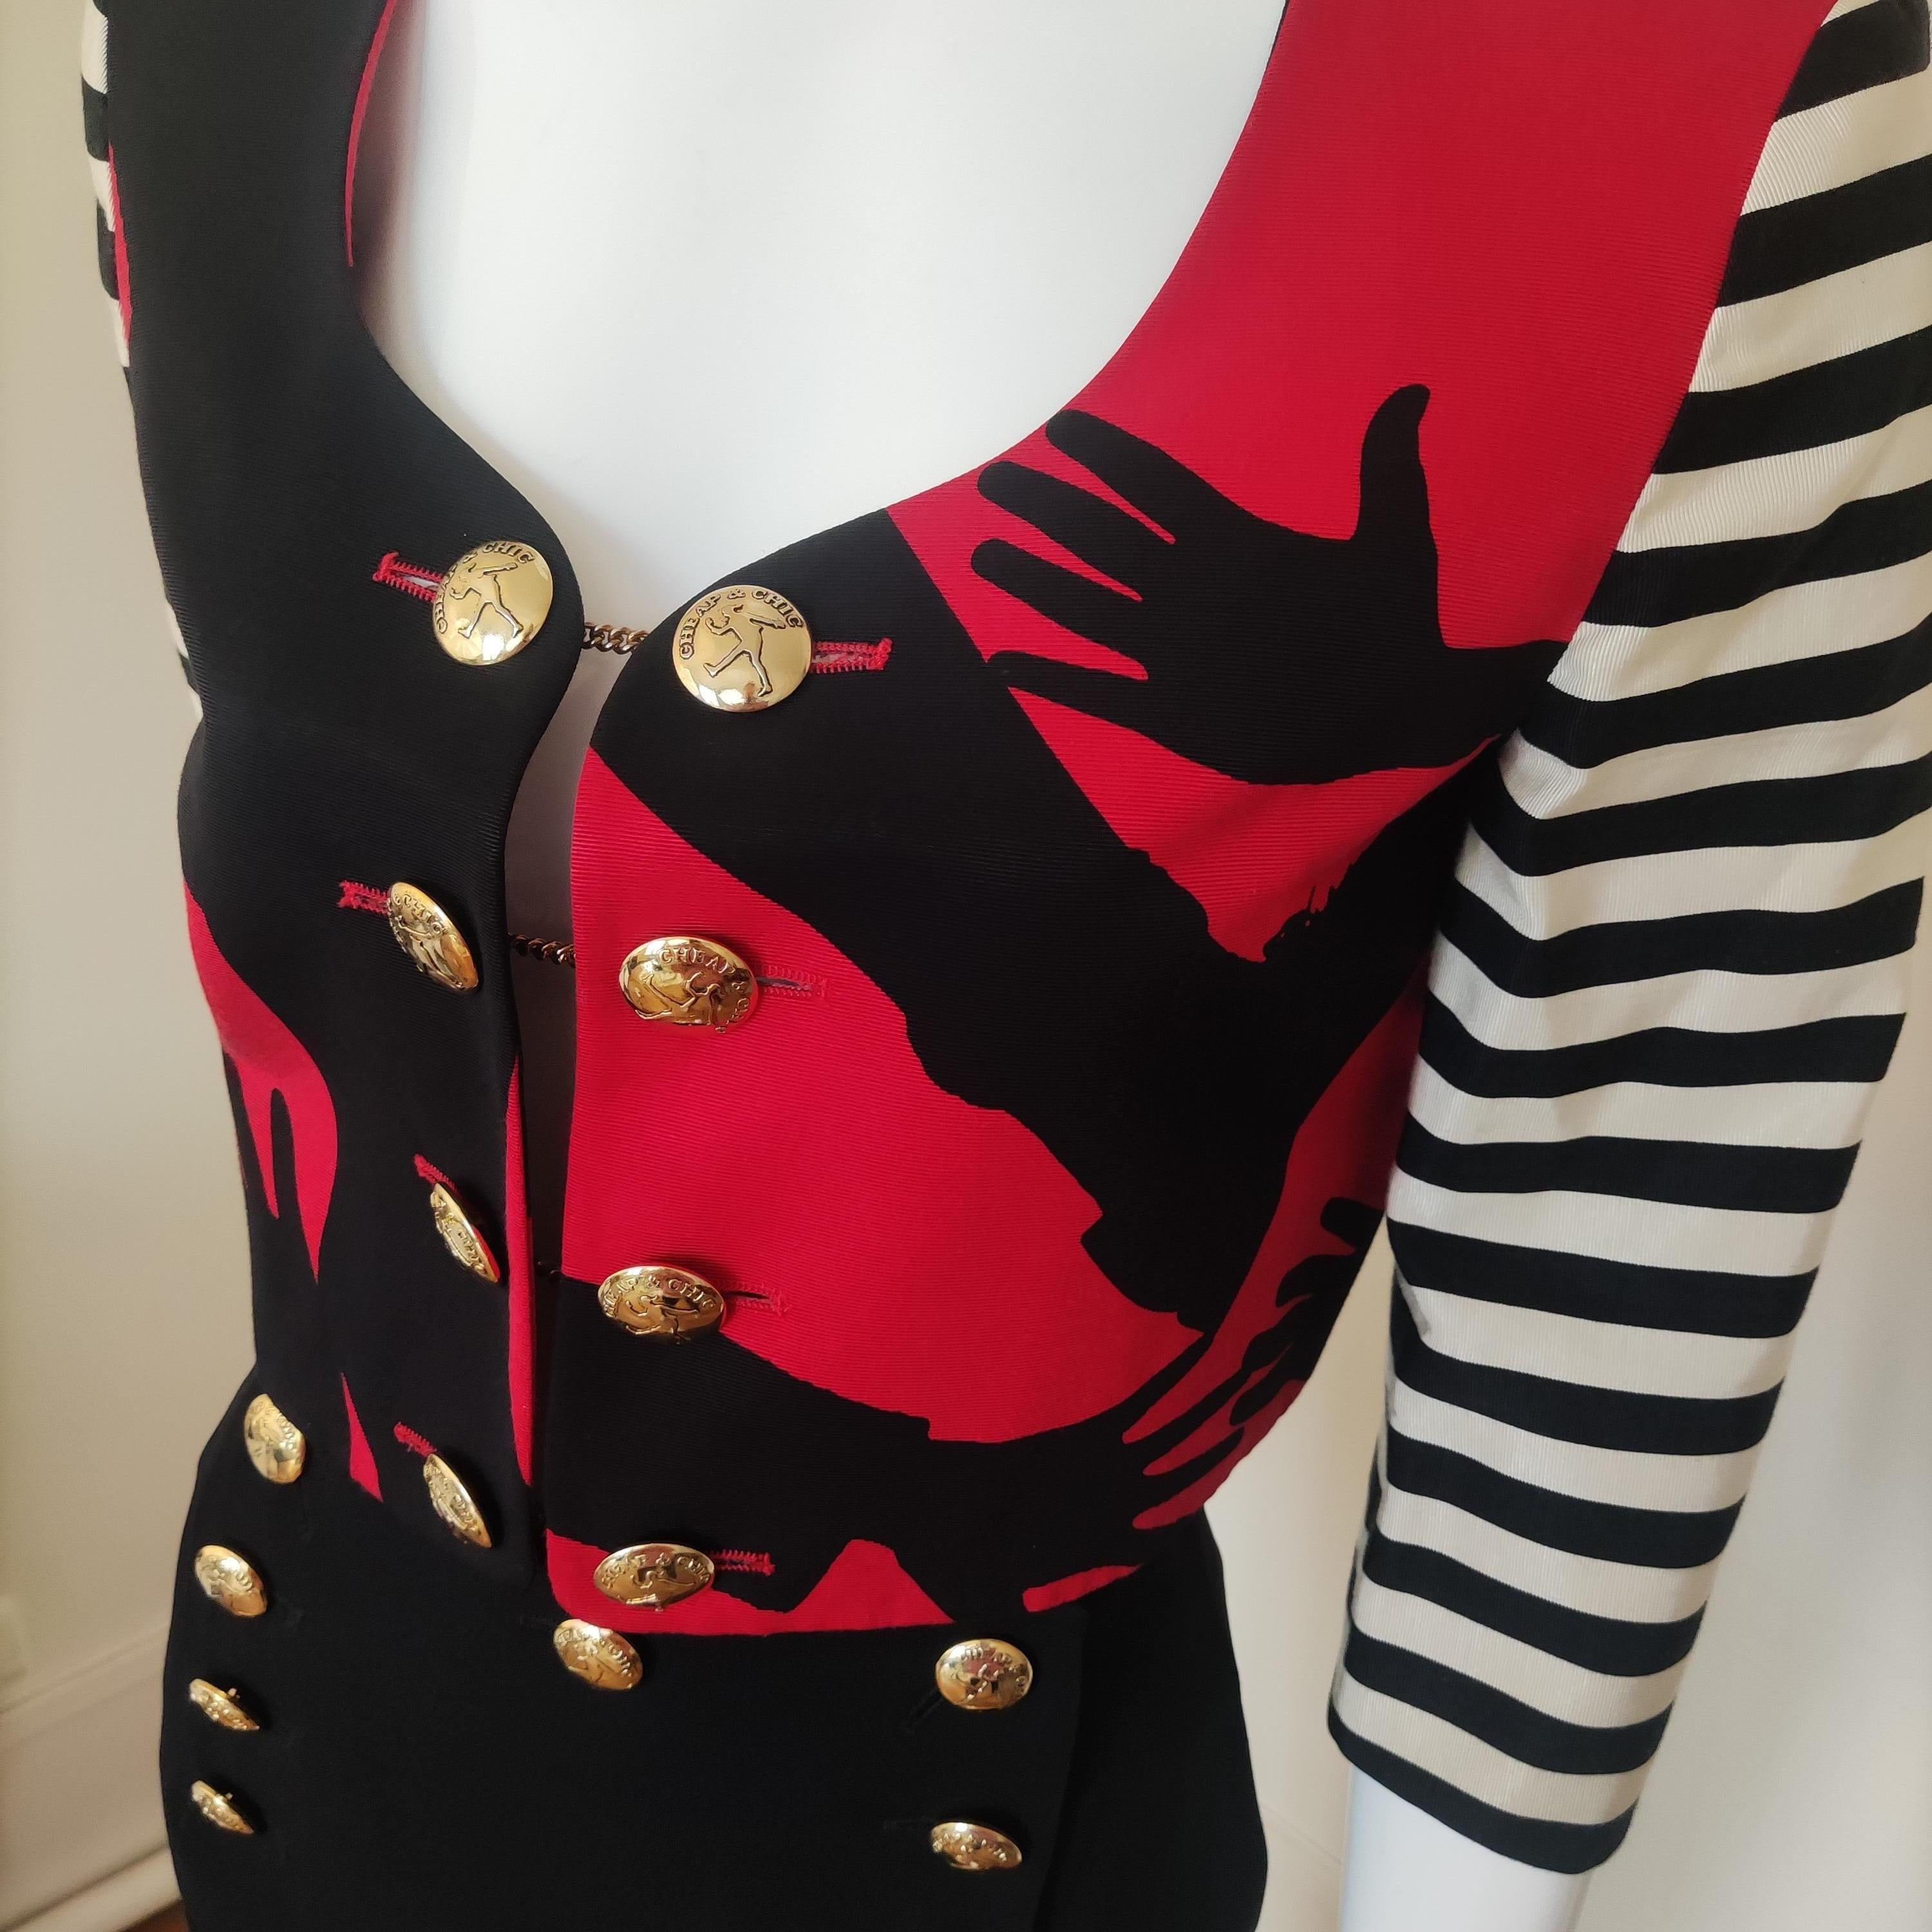 Moschino Cheap and Chic Olive Oyl Popeye Arms Legs Shadow The Nanny Couture Suit For Sale 5